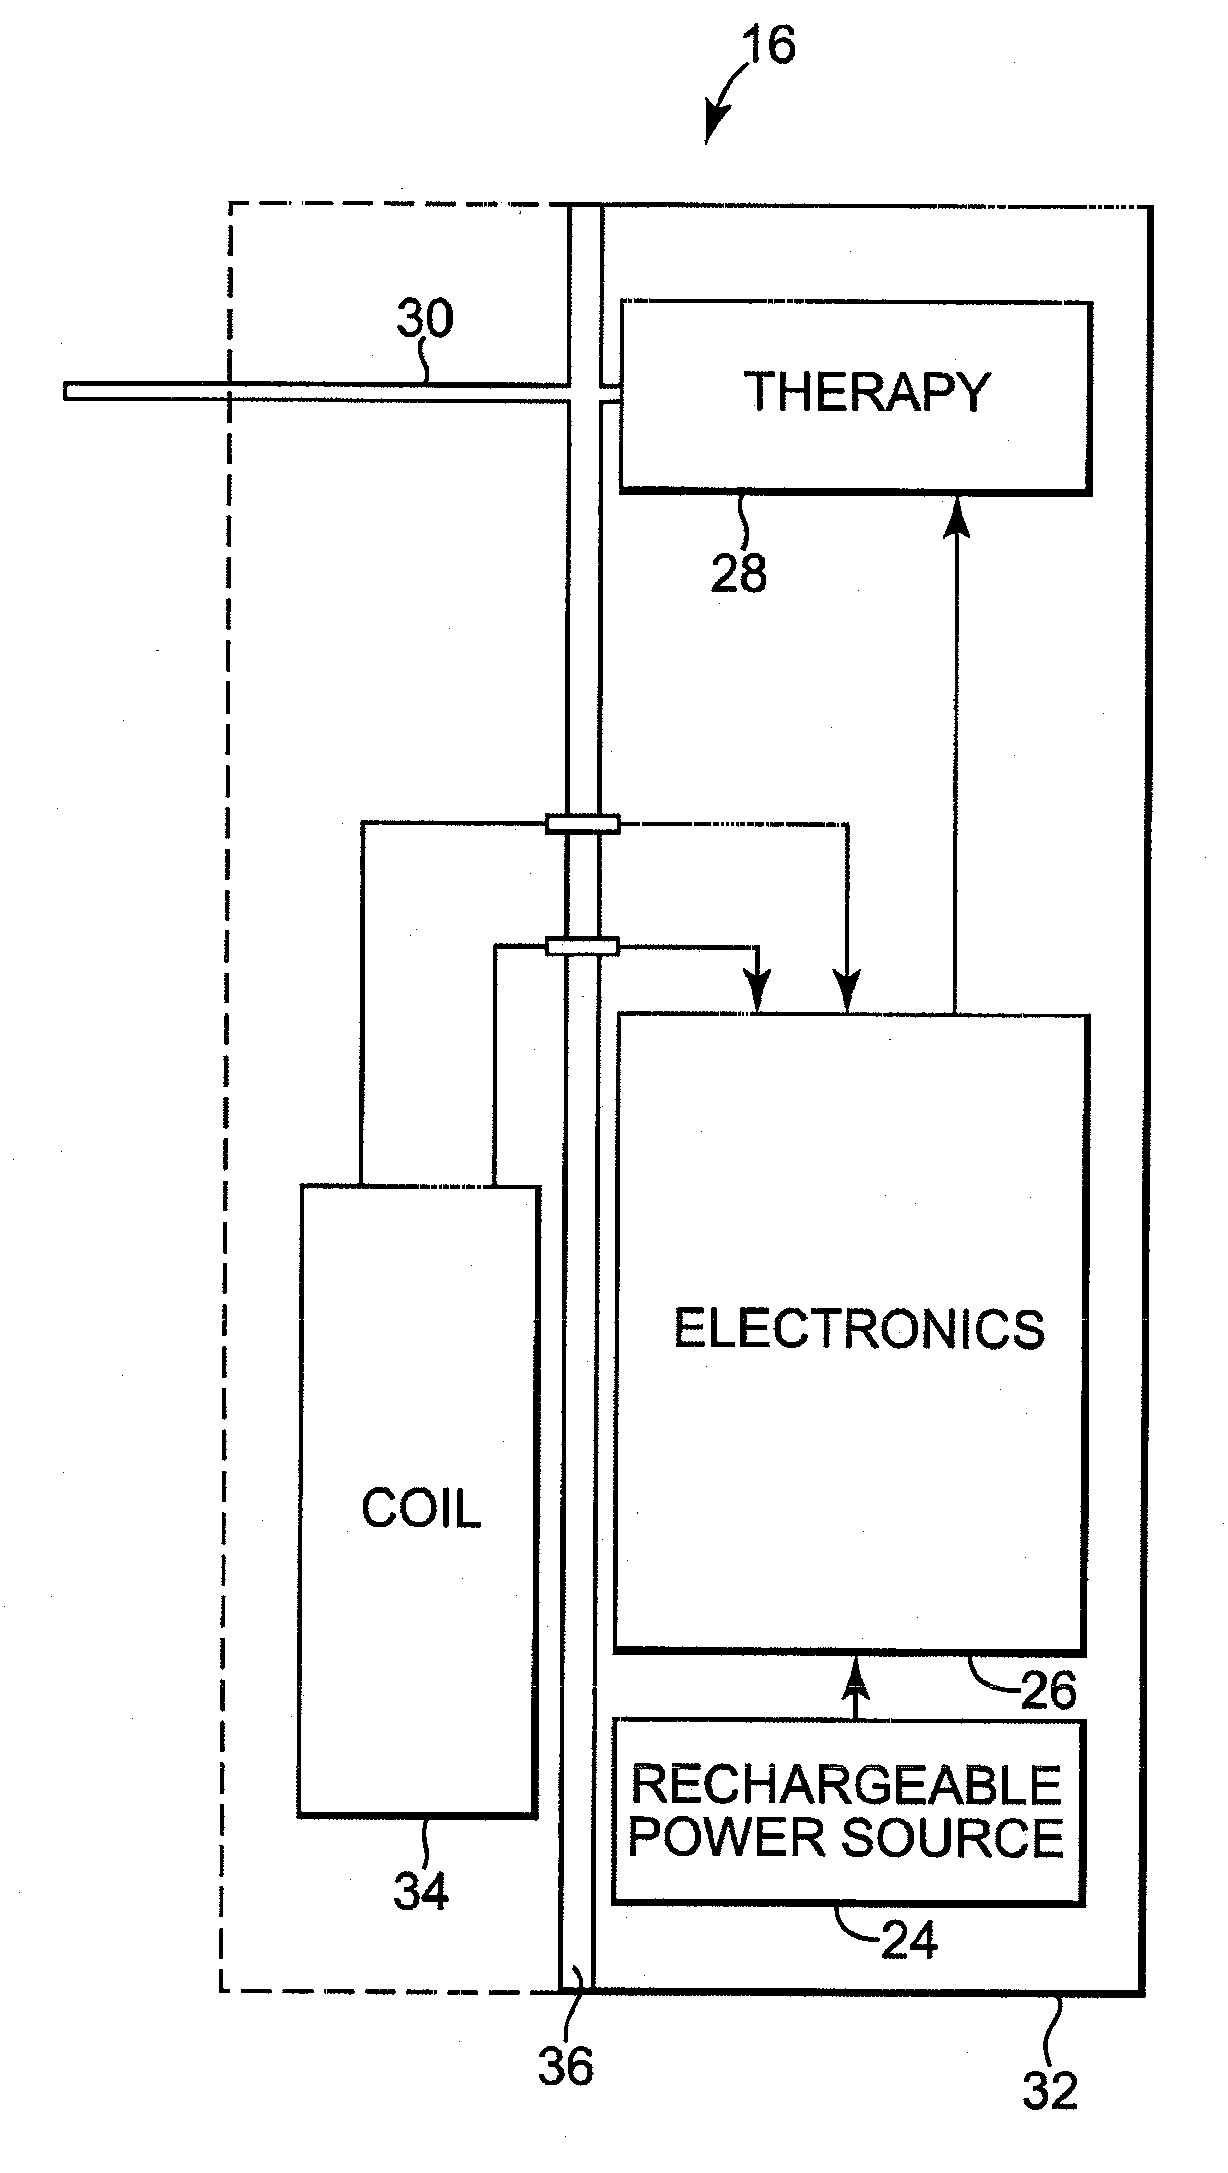 Method of Energy Transfer to an Implantable Medical Device While Coupling Energy to Charging Unit